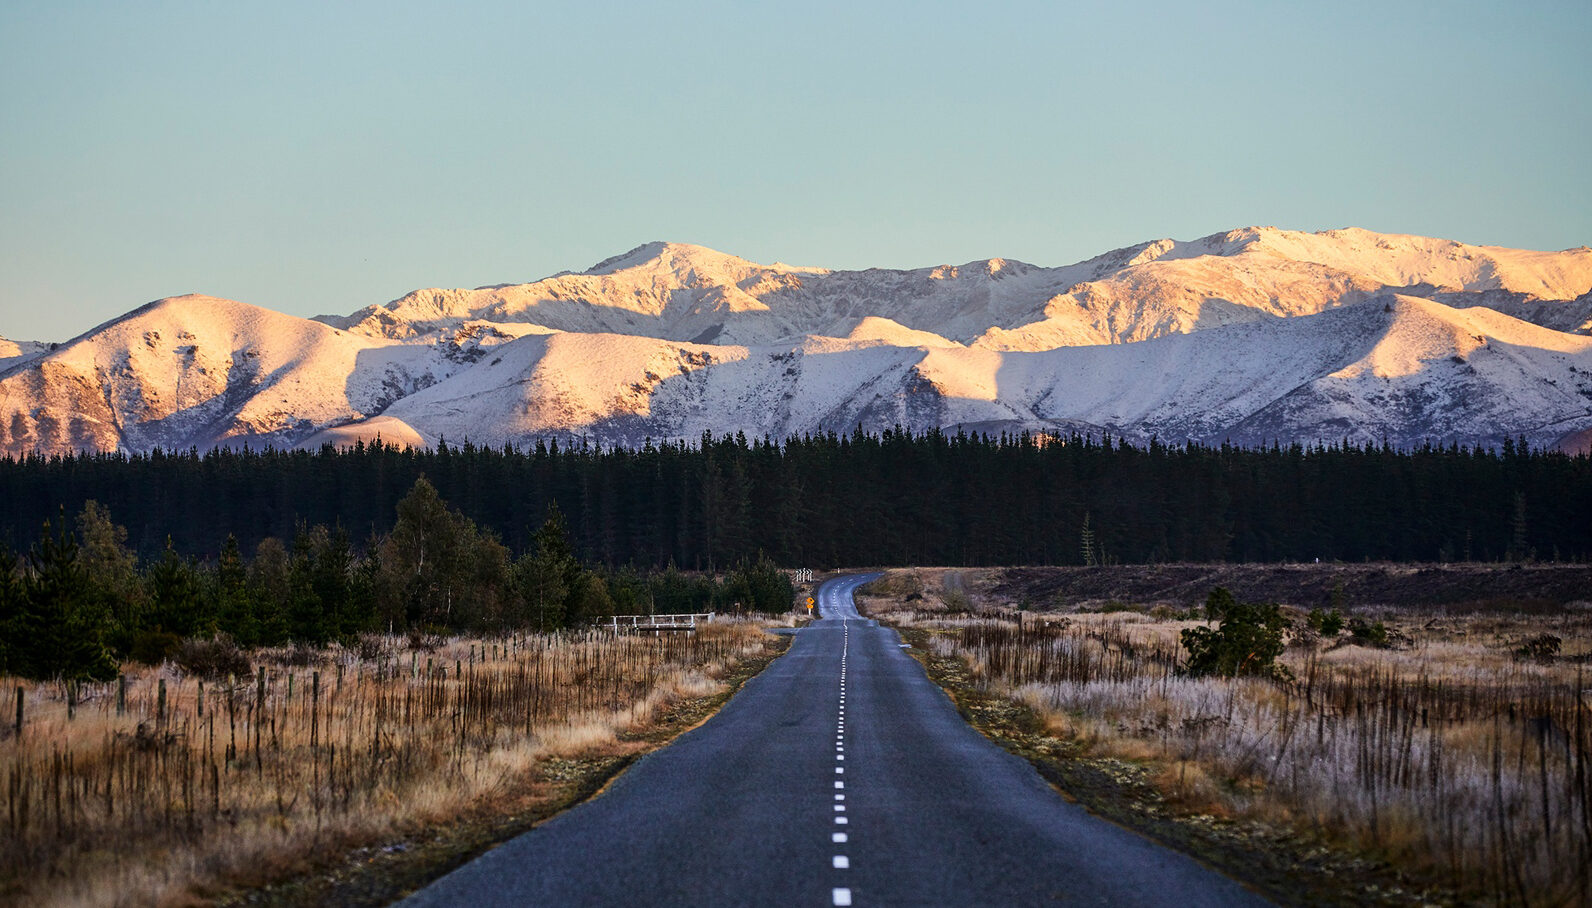 Road trip in Canterbury. Scenic self-drives in New Zealand.